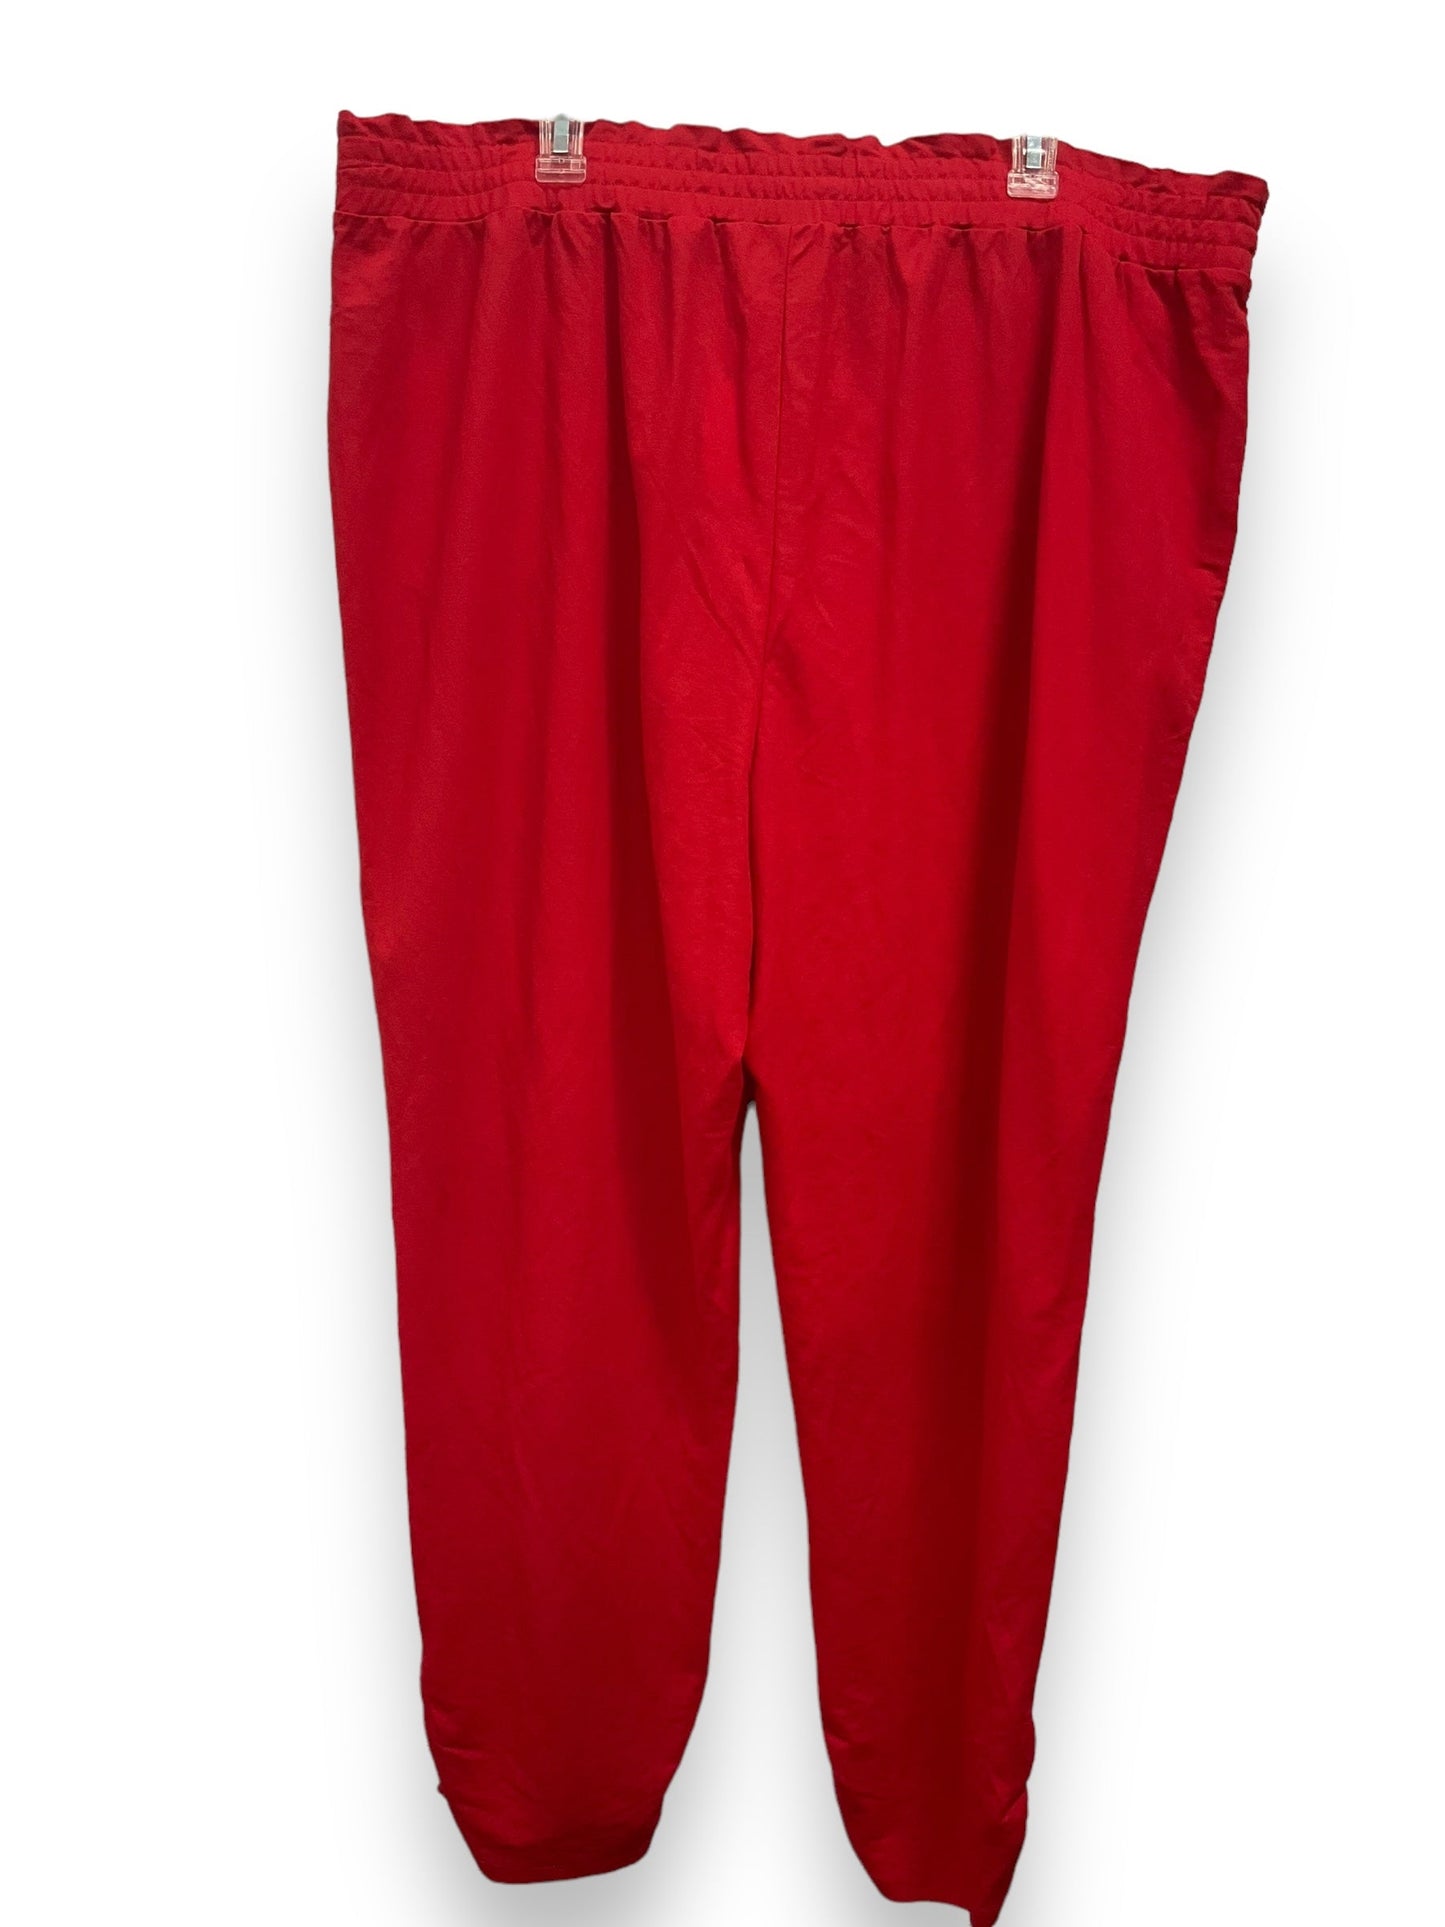 Red Pants Linen Cato, Size 3x